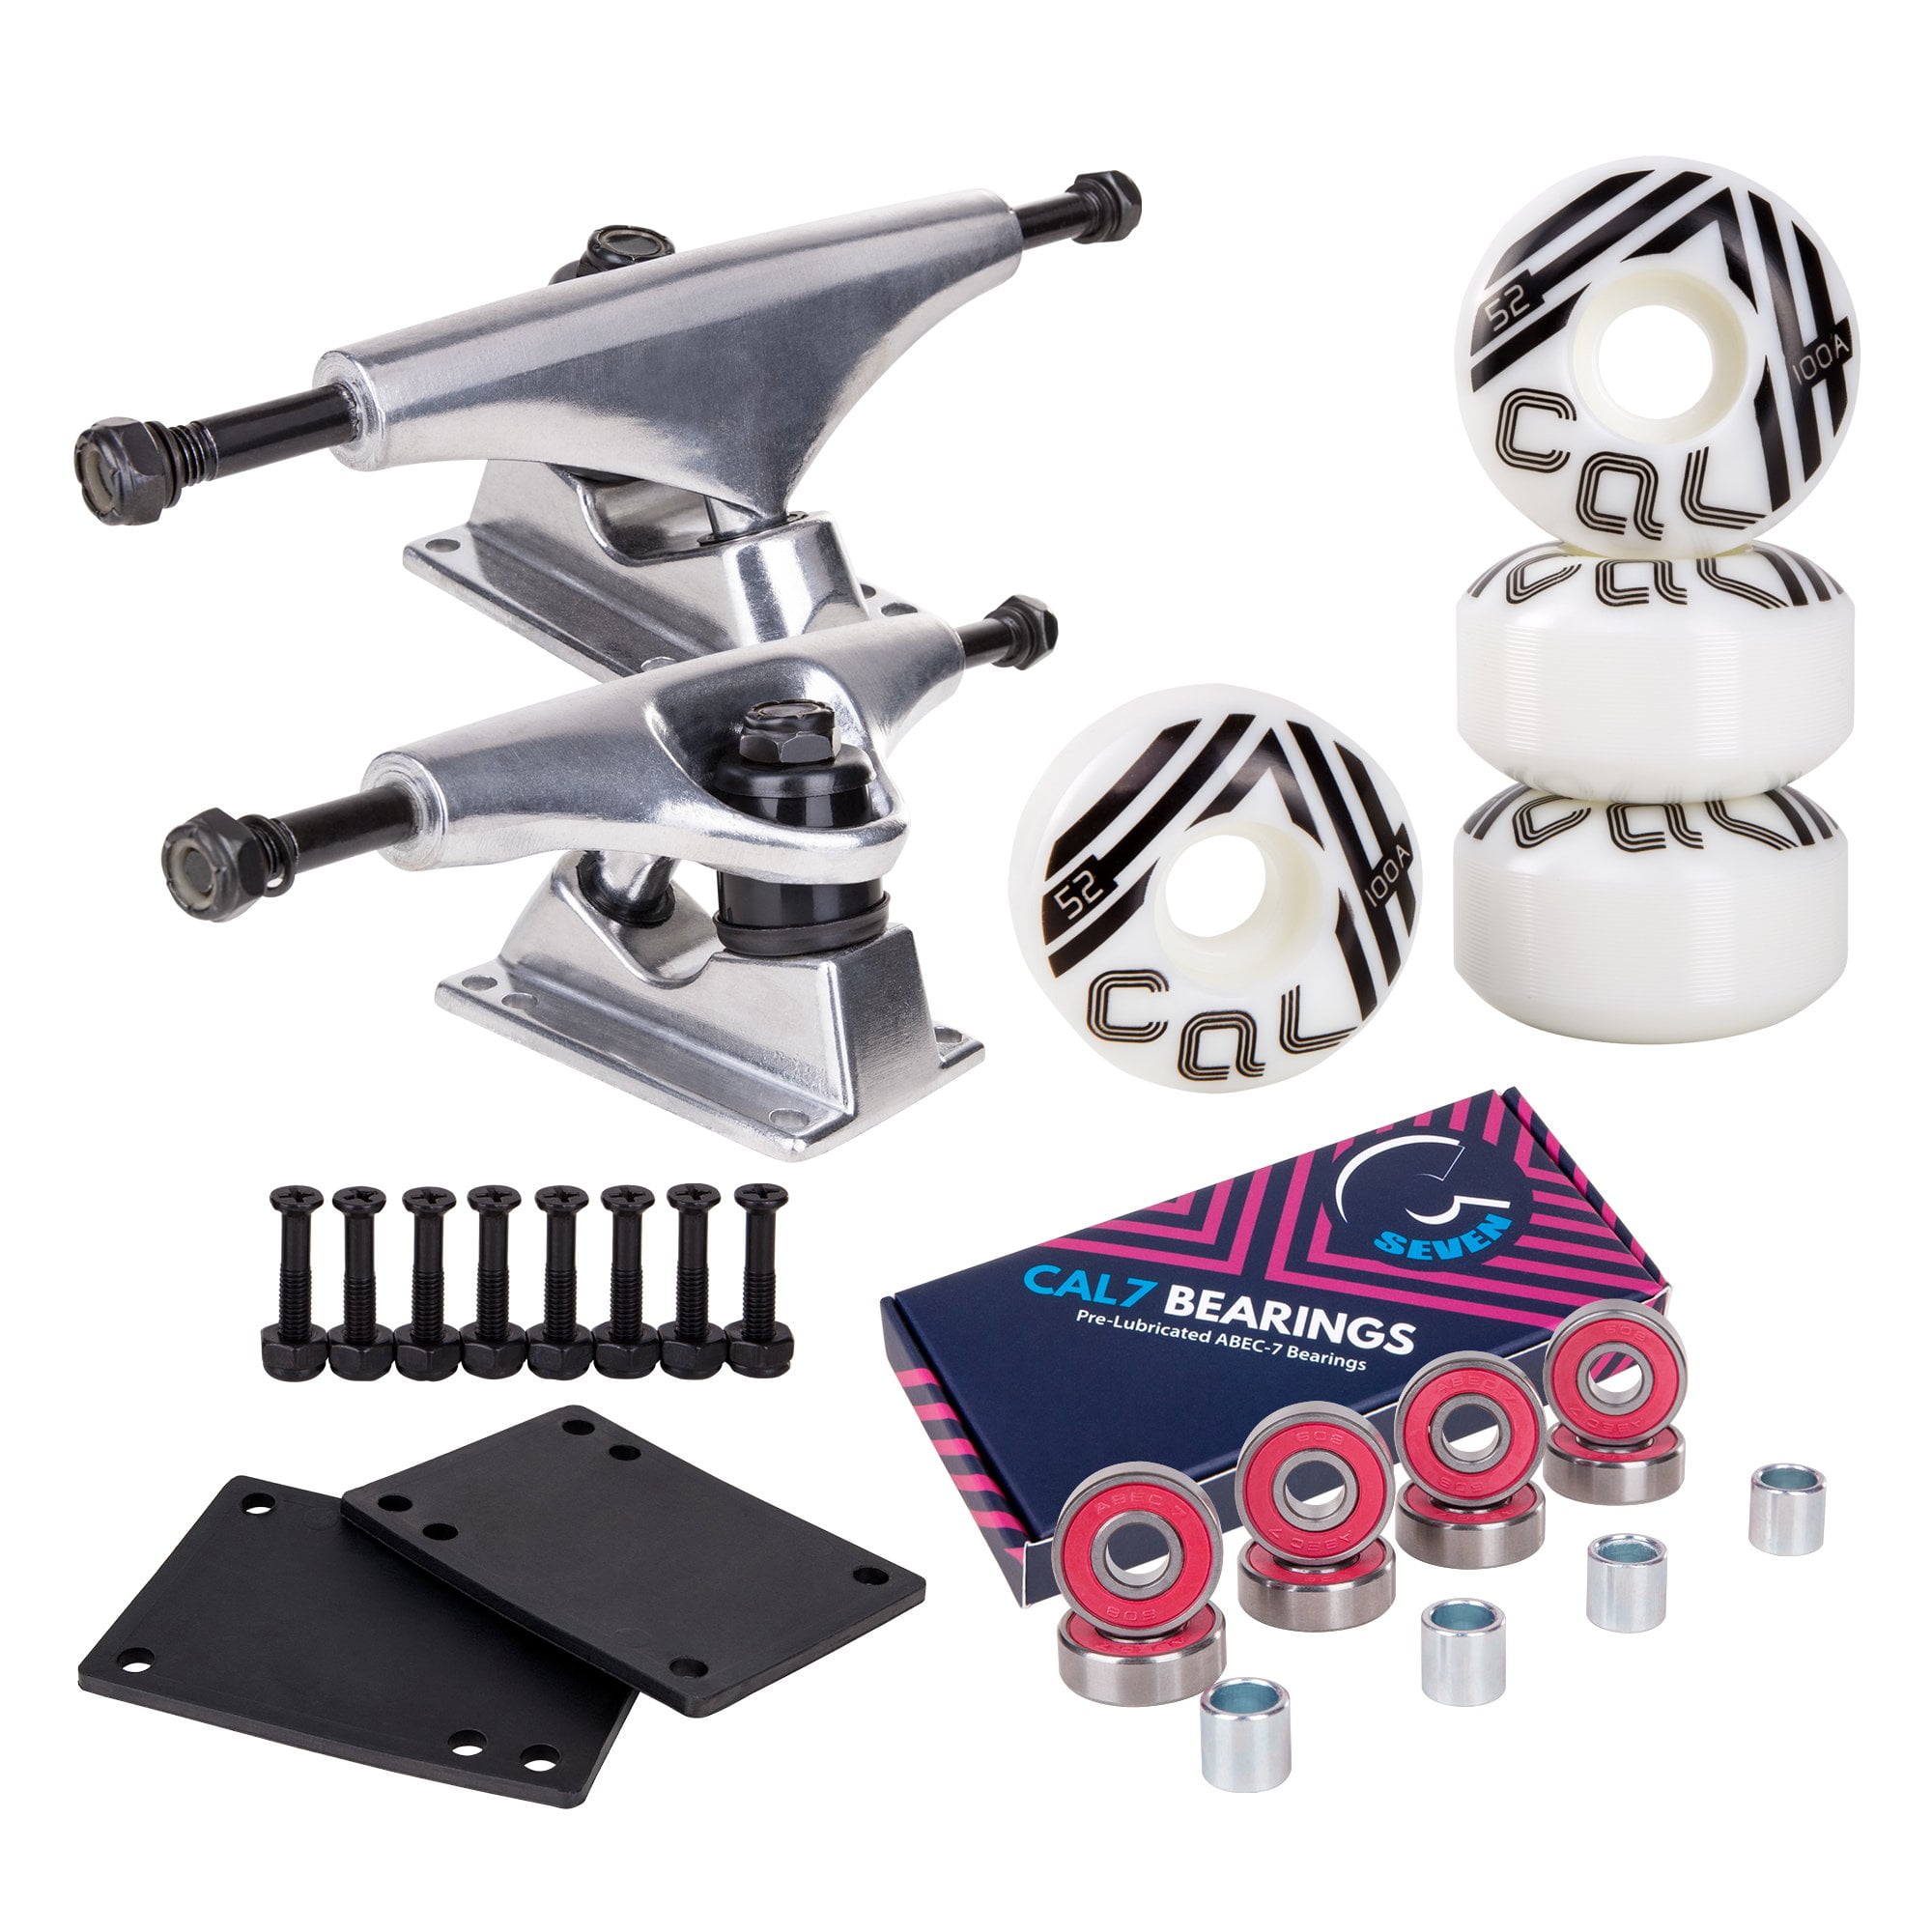 Cal 7 Skateboard Package Combo with 5 Inch 52mm 99A Wheels Complete Set of Bearings and Steel Hardware 129 Millimeter Trucks 